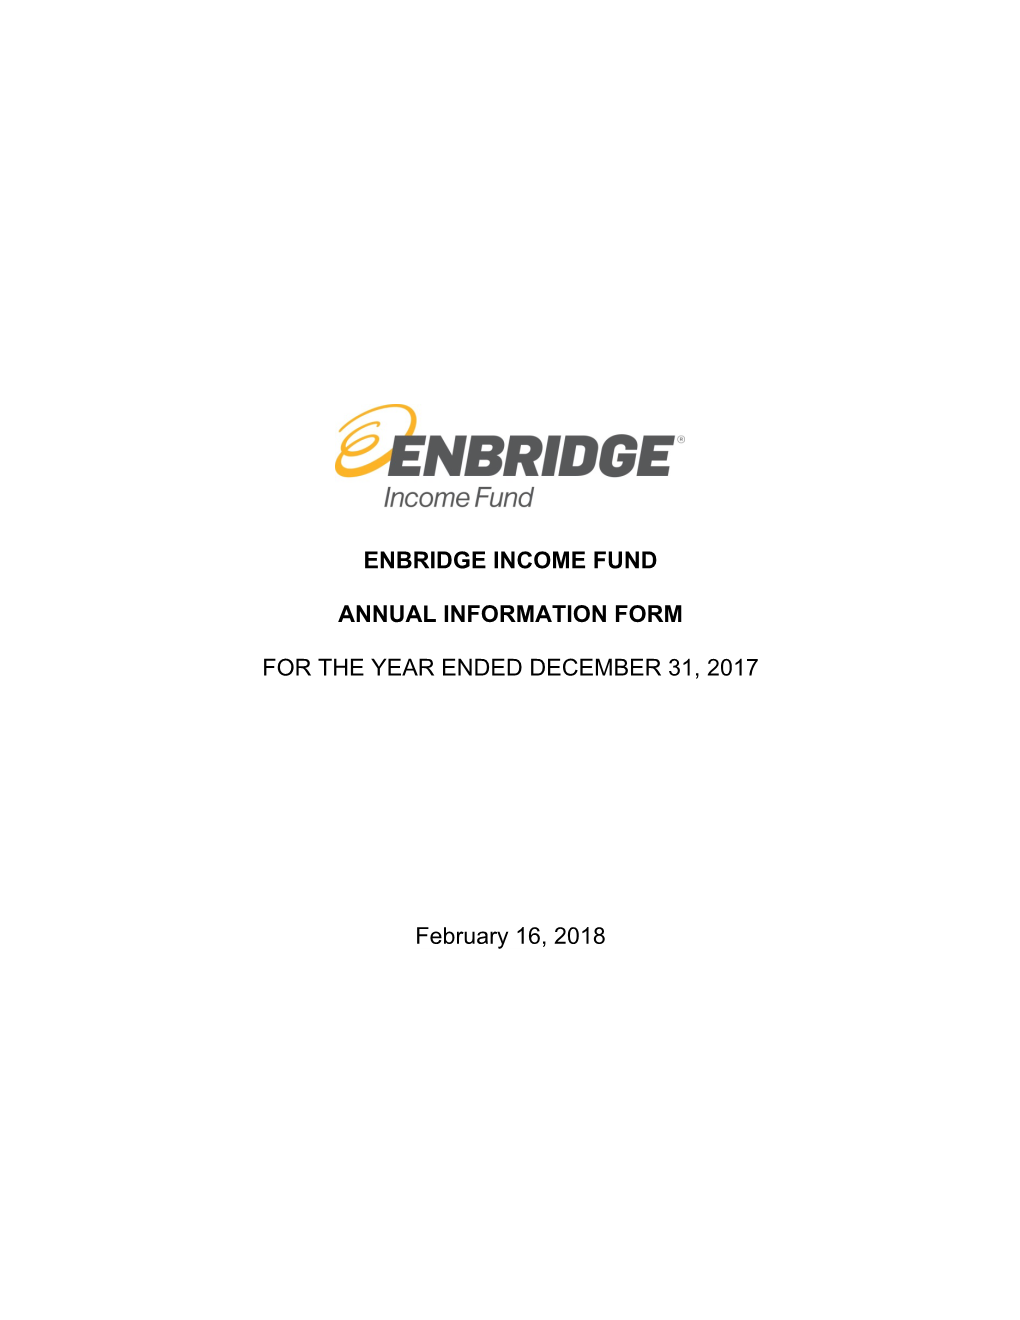 Enbridge Income Fund Annual Information Form for The